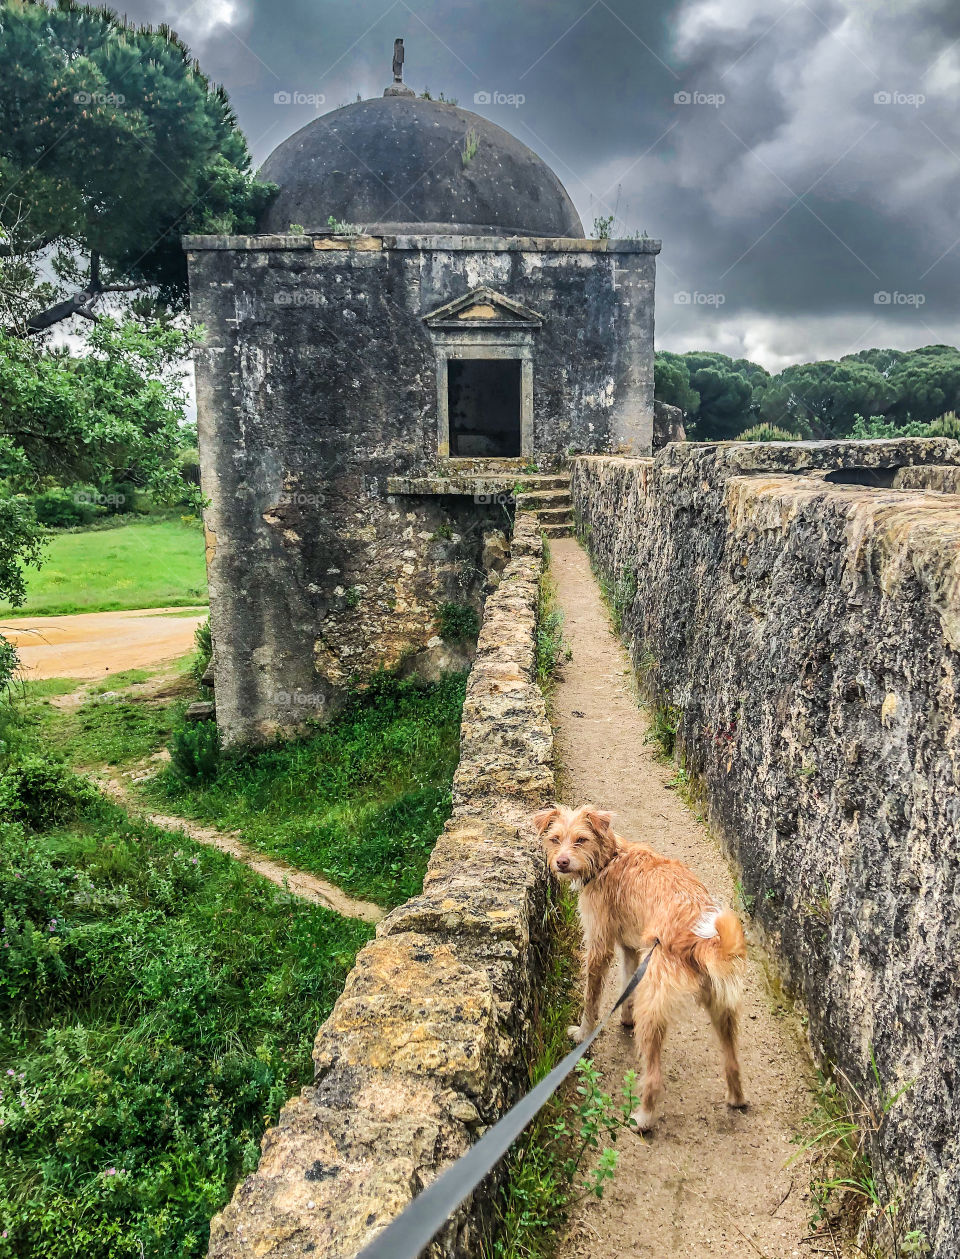 Walking the dog along an ancient, stone aqueduct on a cloudy morning